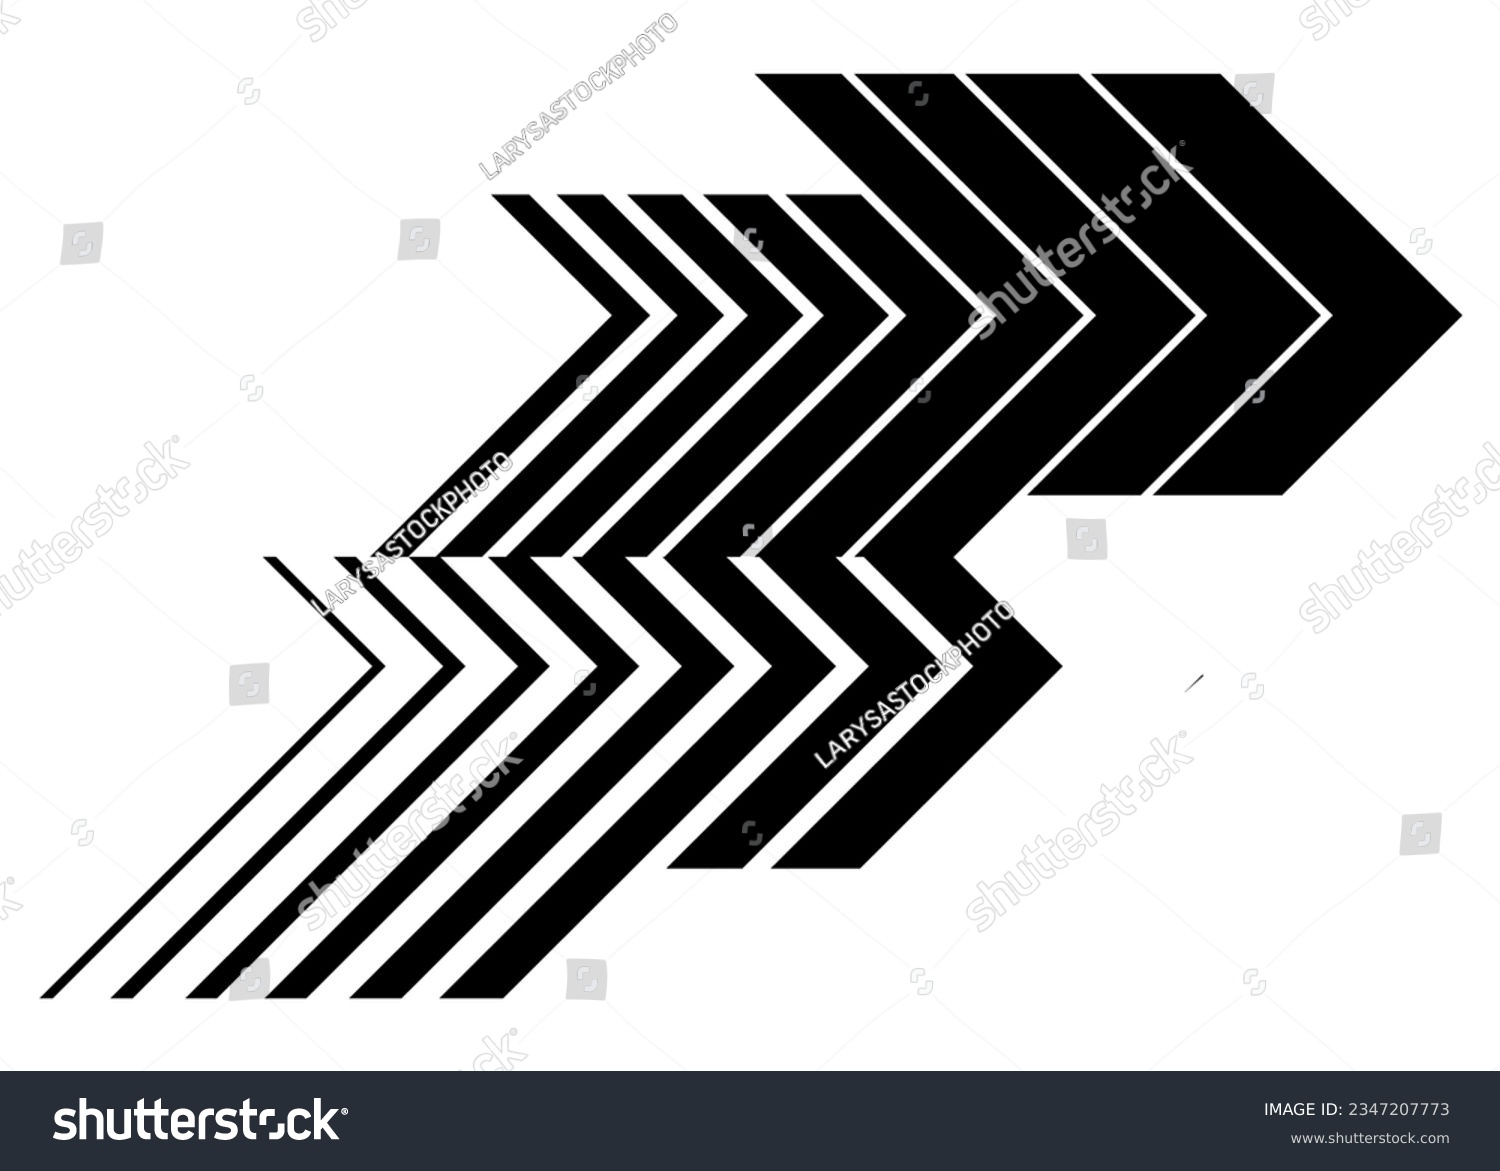 SVG of Black vector arrow on a white background. Universal pattern for a sticker on a vehicle, car, bus, SUV, toys, a pattern on sportswear, web design, interior design, printing. Abstract vector background. svg